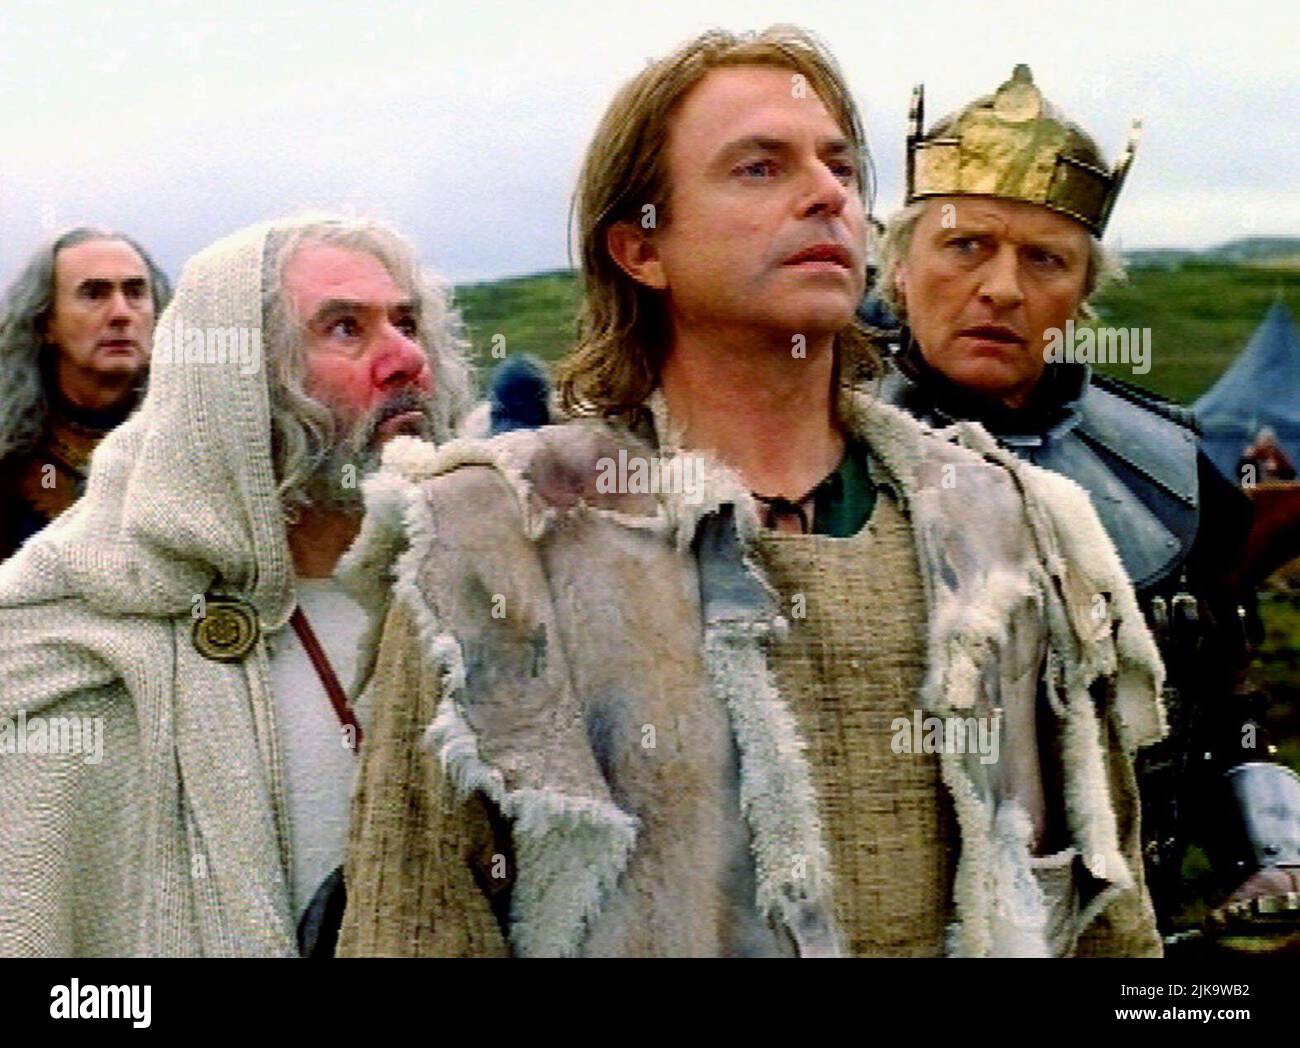 Sam Neill & Rutger Hauer Television: Merlin (TV-Zweiteiler) Characters:  Merlin & King Vortigern Usa/Uk 1998, / Mini Series Director: Steve Barron  26 April 1998 **WARNING** This Photograph is for editorial use only